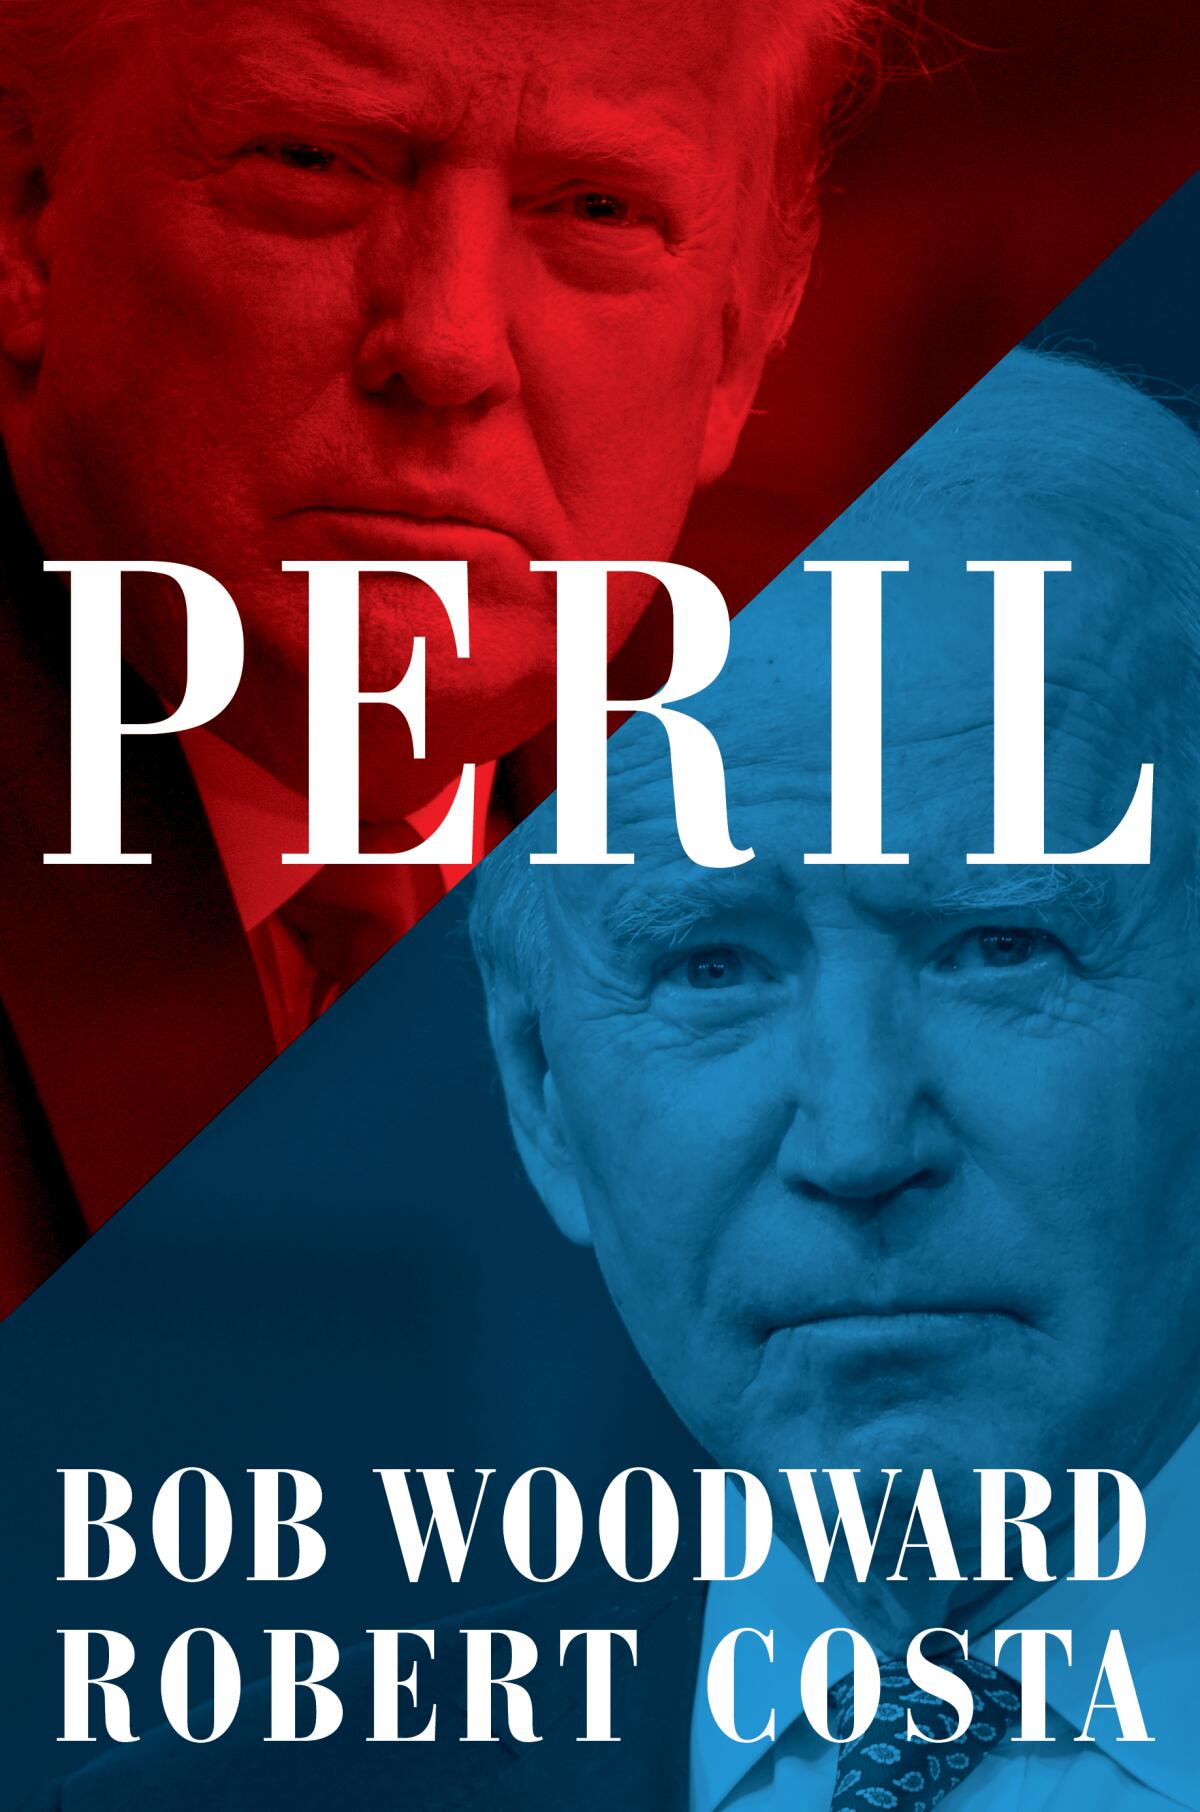 An image of a man in red in the upper left corner and a man in blue in the lower right corner on the book cover "Peril."